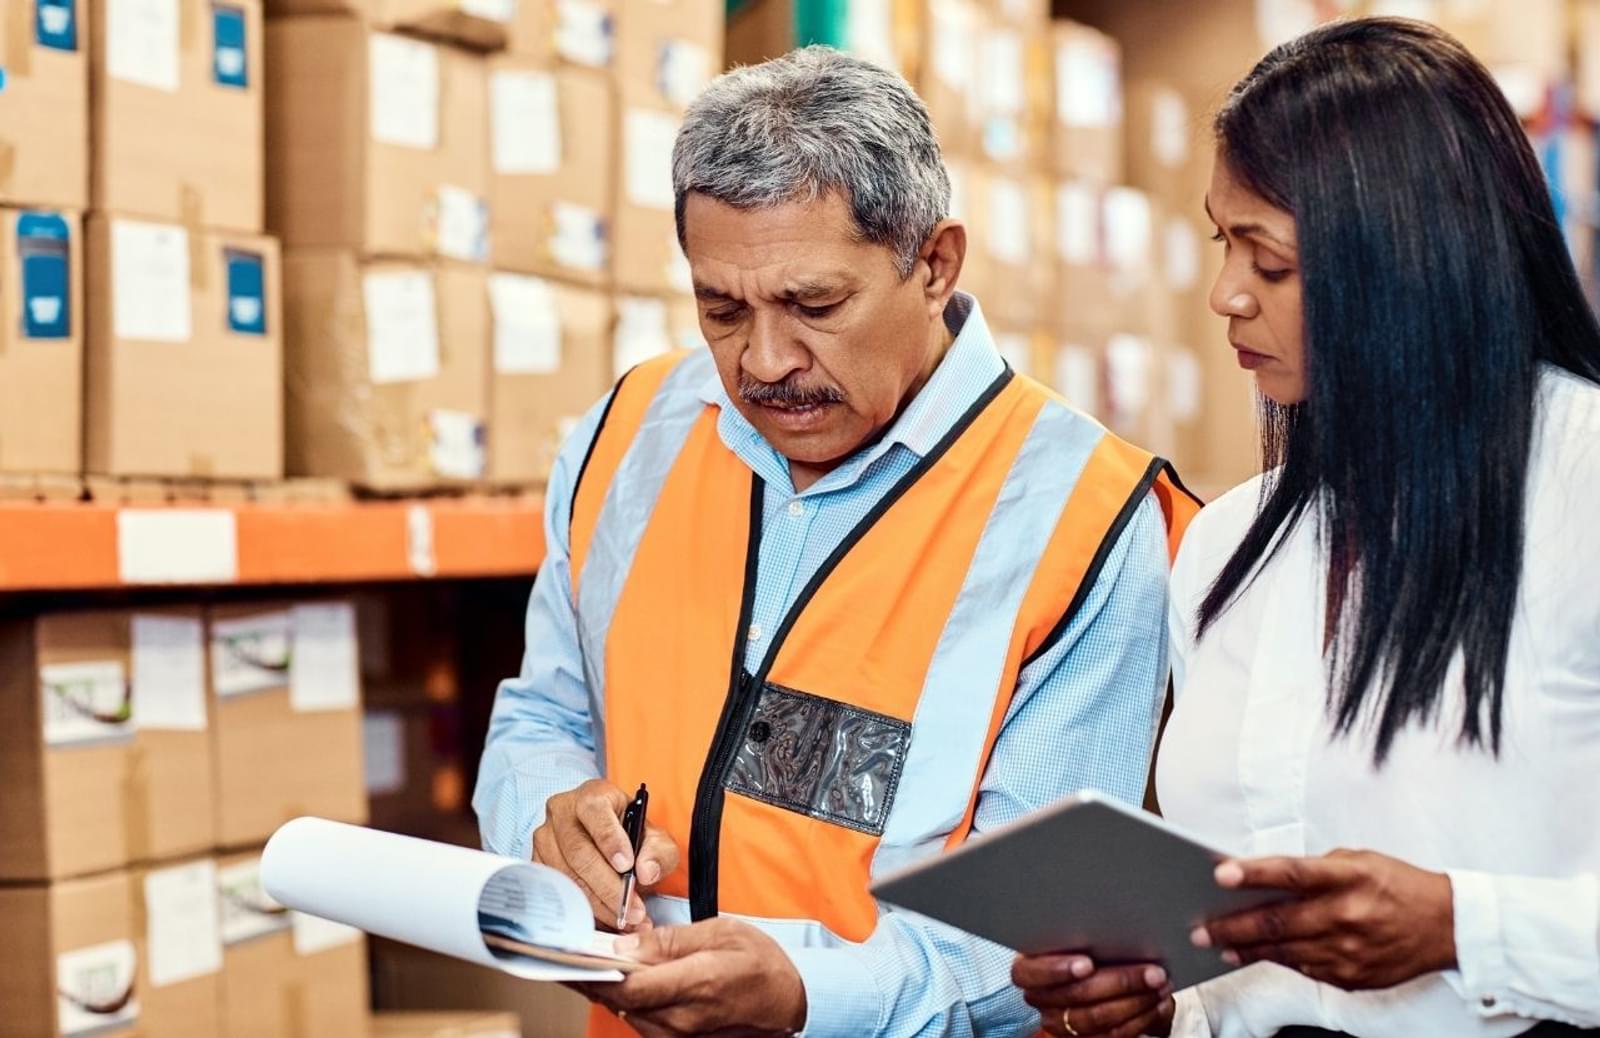 Warehouse man and woman holding tablet and paper and discussing their contents